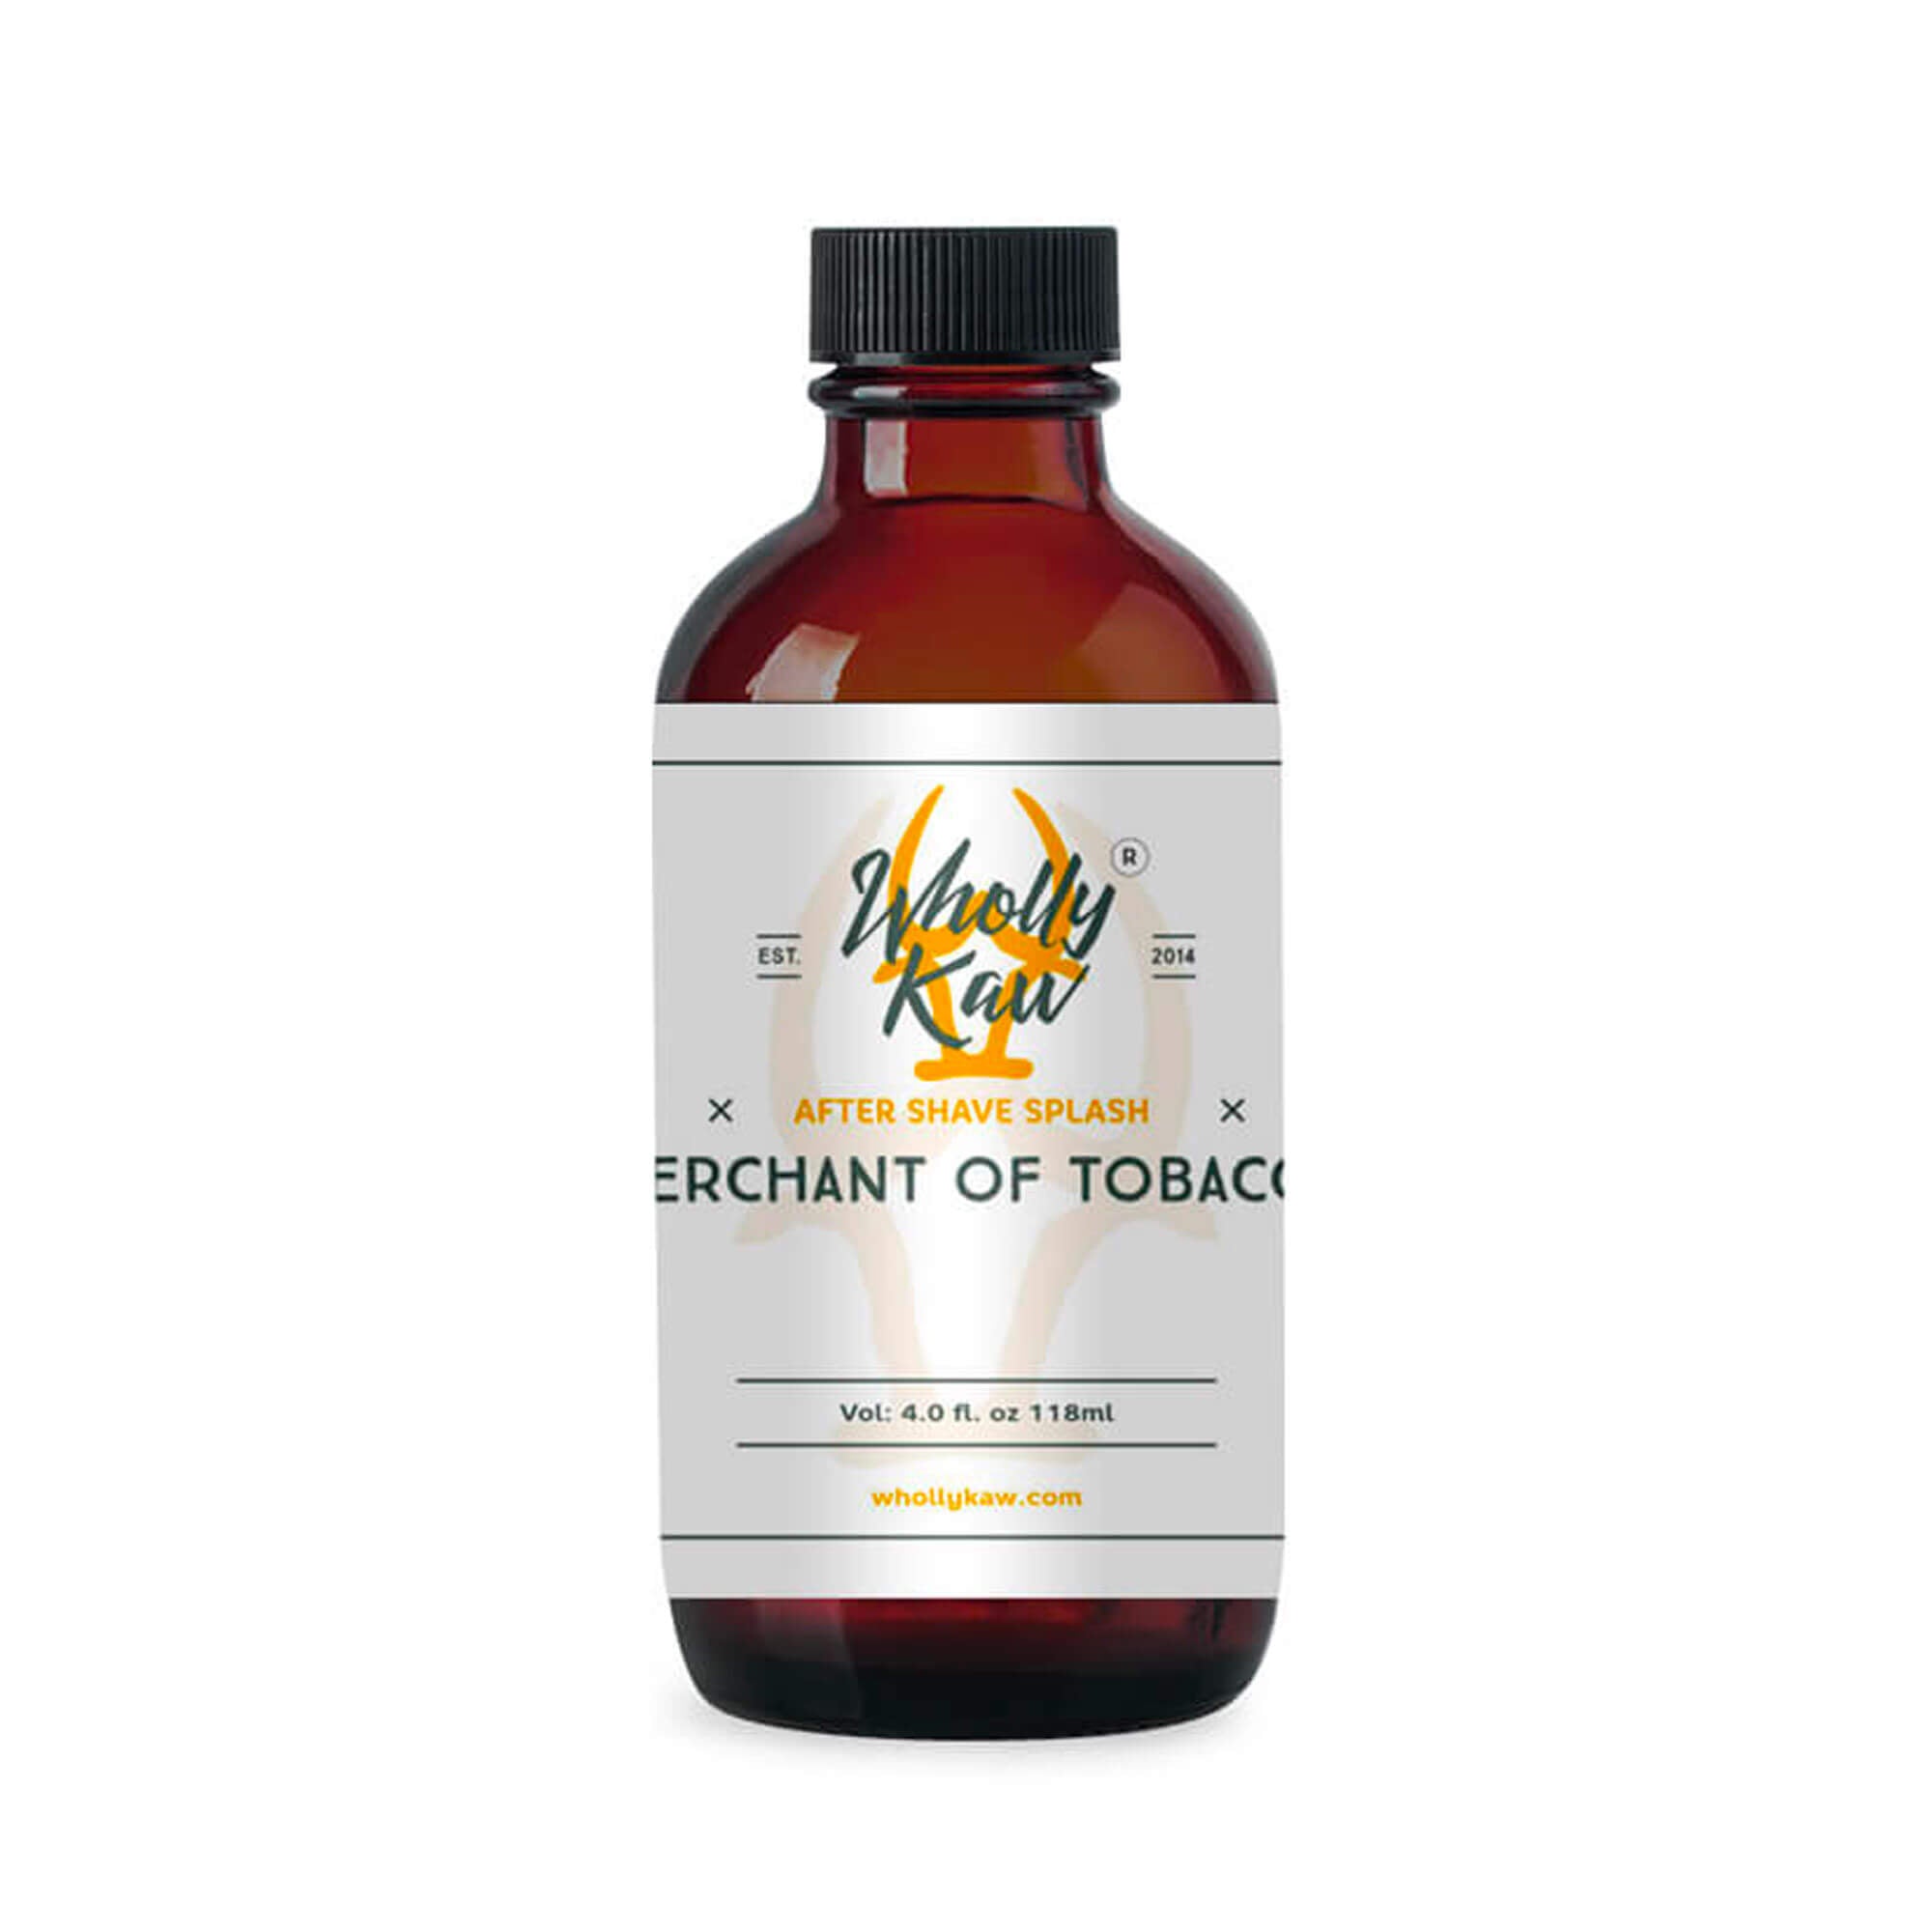 Wholly Kaw Merchant Of Tobacco Aftershave Splash